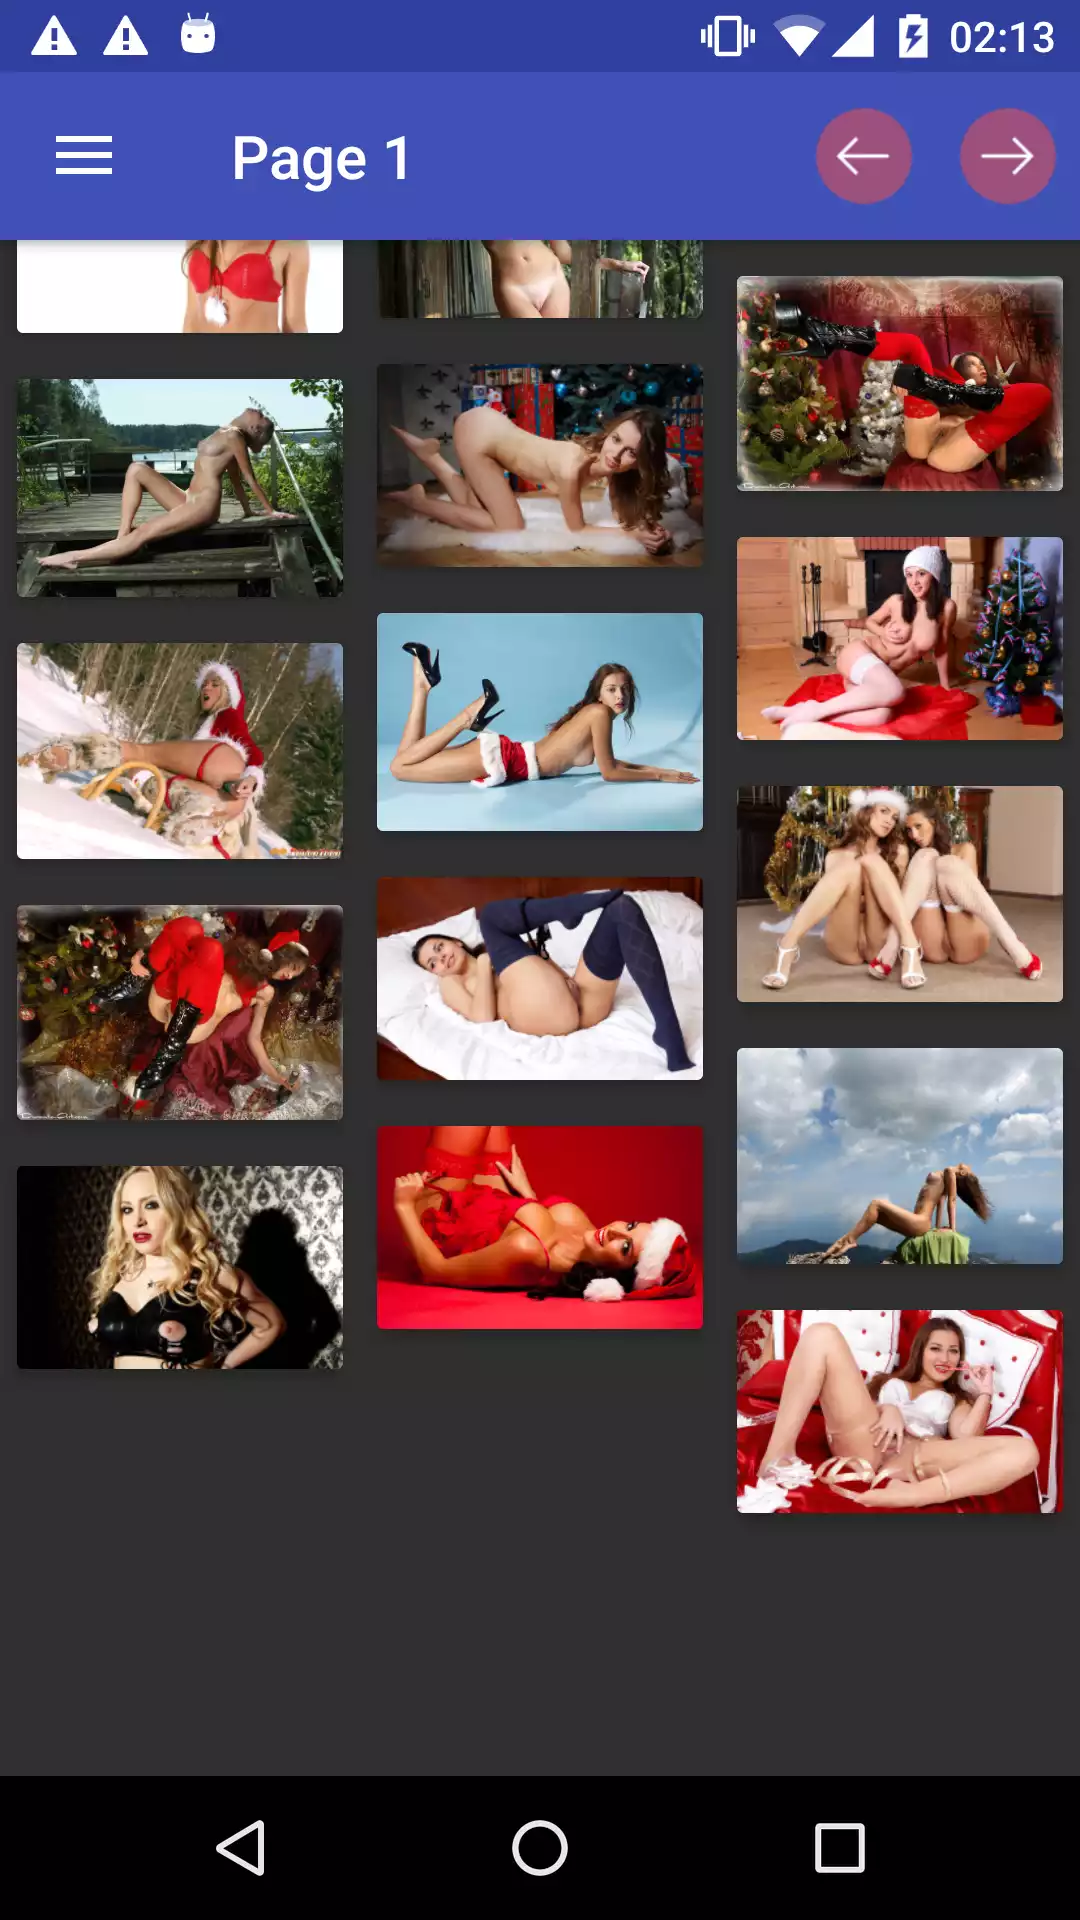 xxx-holidays porn,wallpapers,picw,rated,pornstars,aplikasi,android,wallpaper,adult,download,photos,hentai,offline,app,sexy,apk,pictures,backgrounds,apps